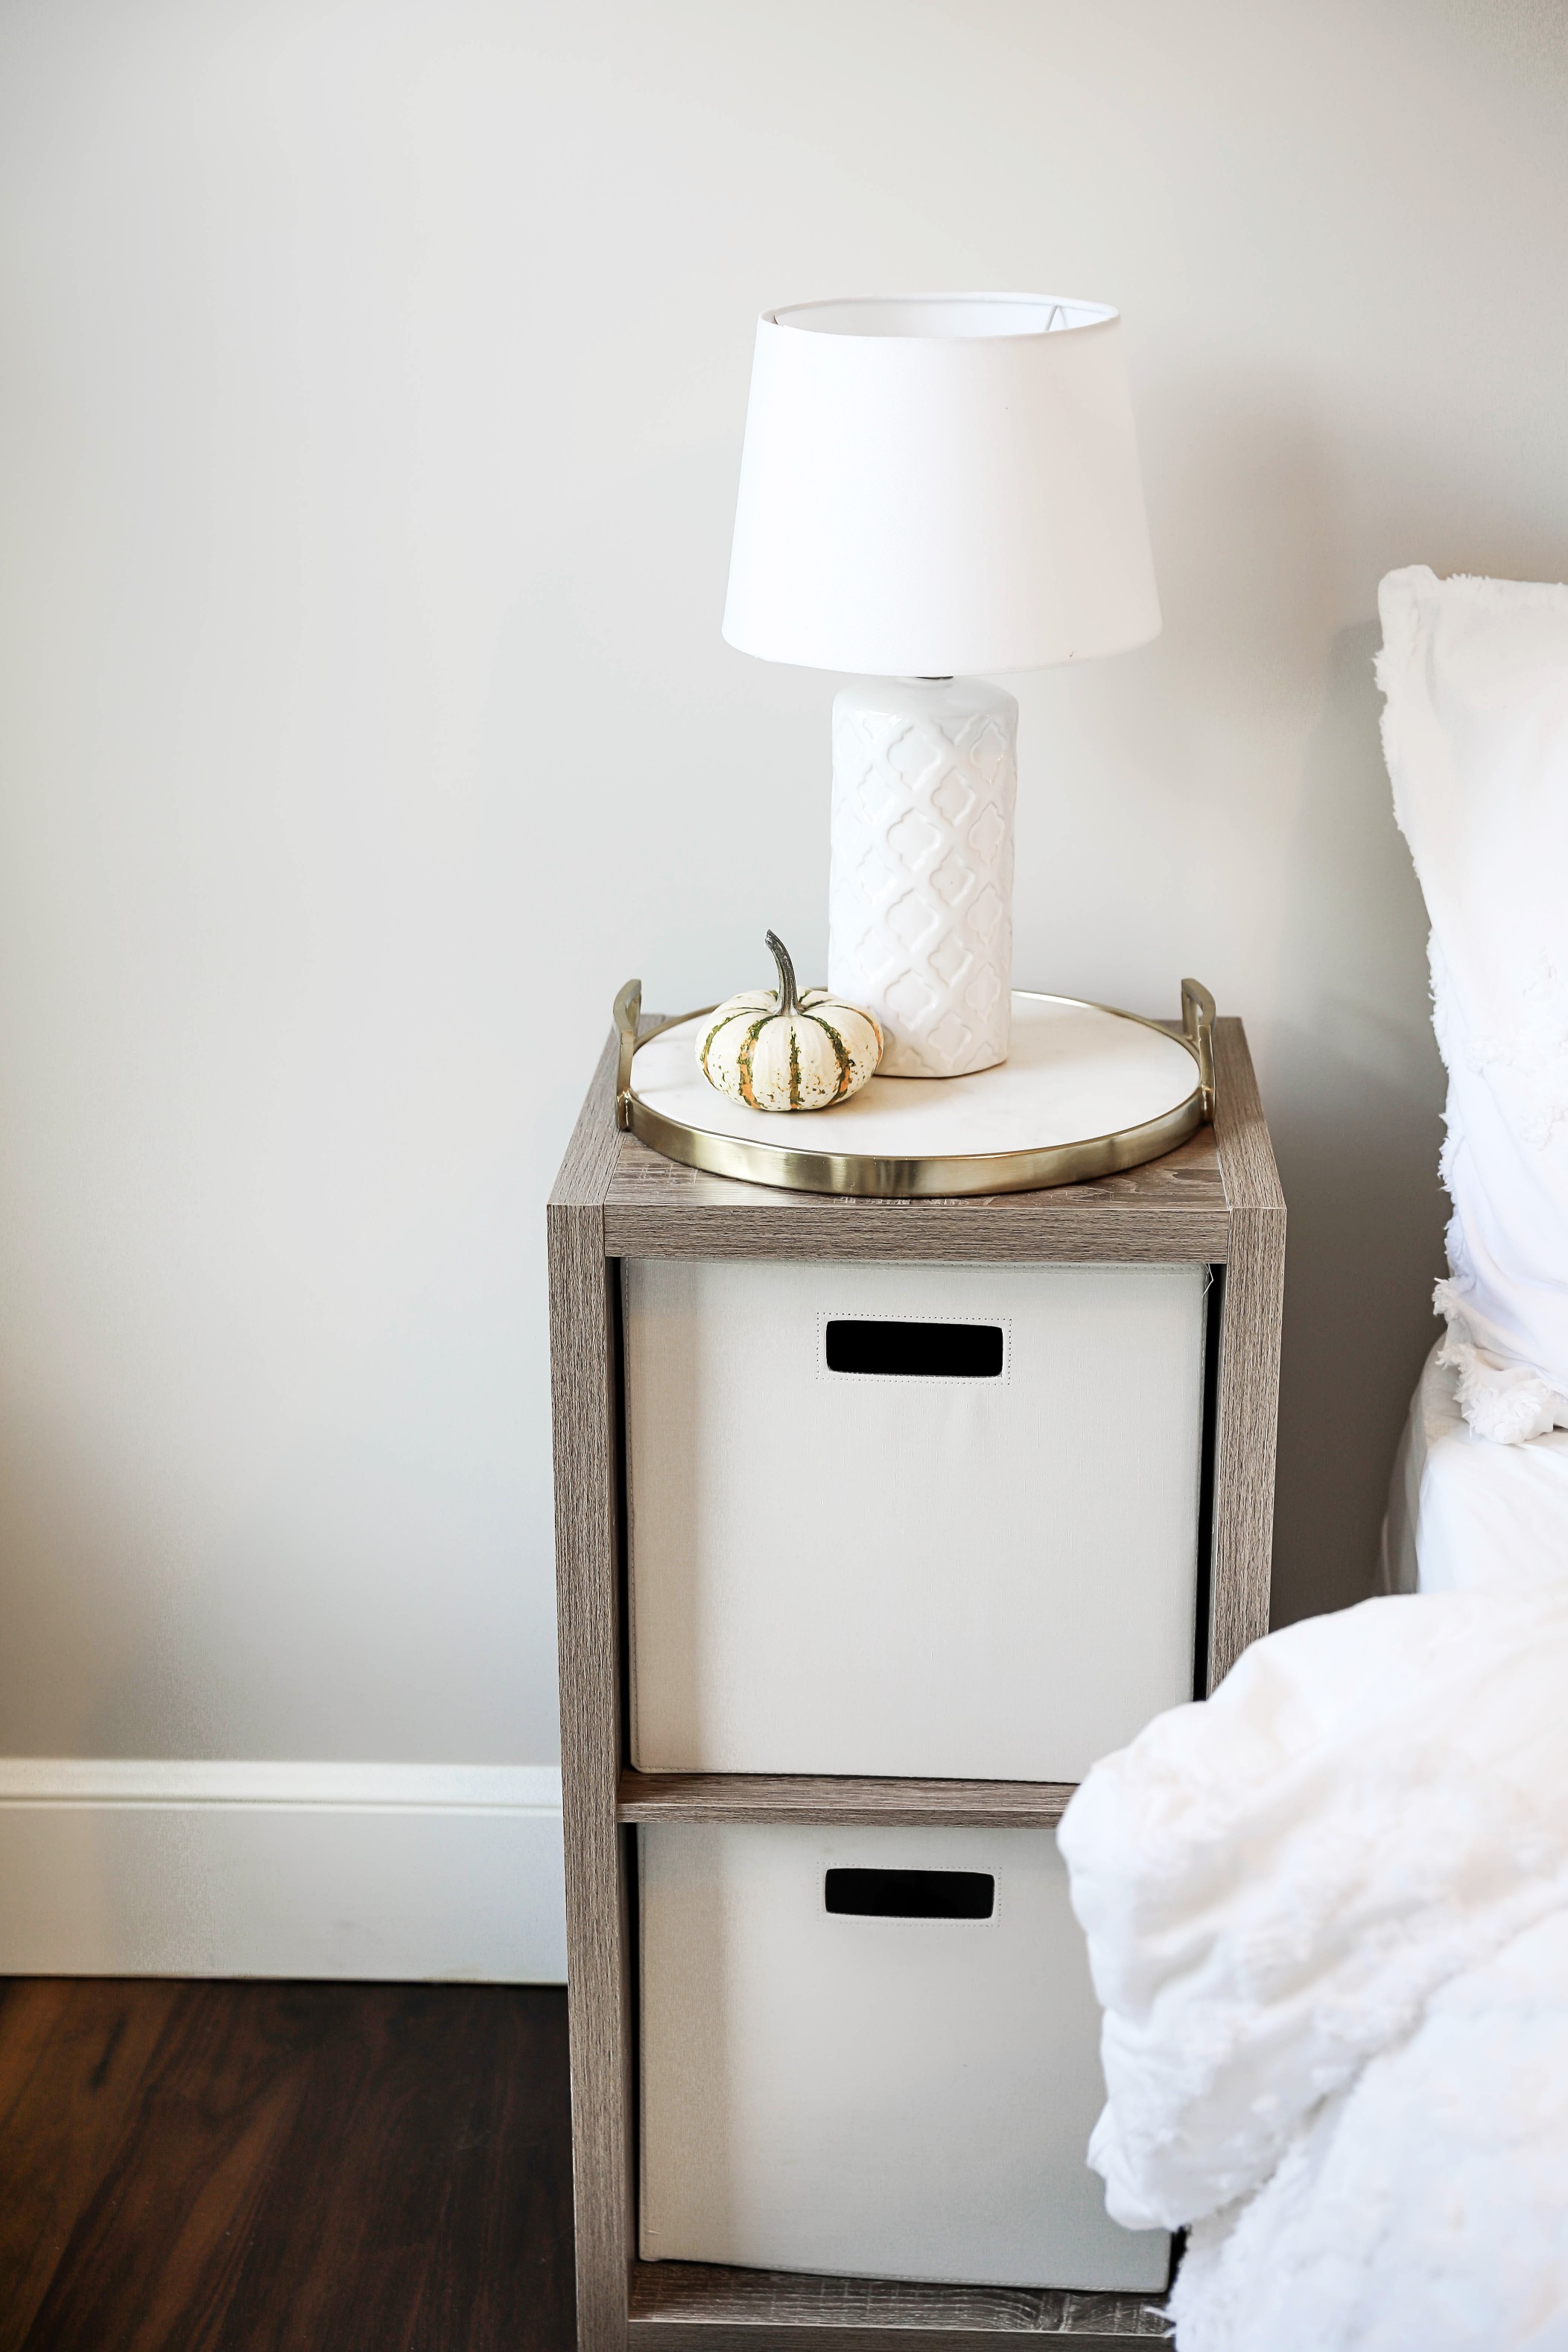 Fall room decor ideas! Inspiration for white and bright room! Check out this fashion blogger's room tour! I love decorating my house for autumn! Details on fashion and lifestyle blog daily dose of charm by lauren lindmark